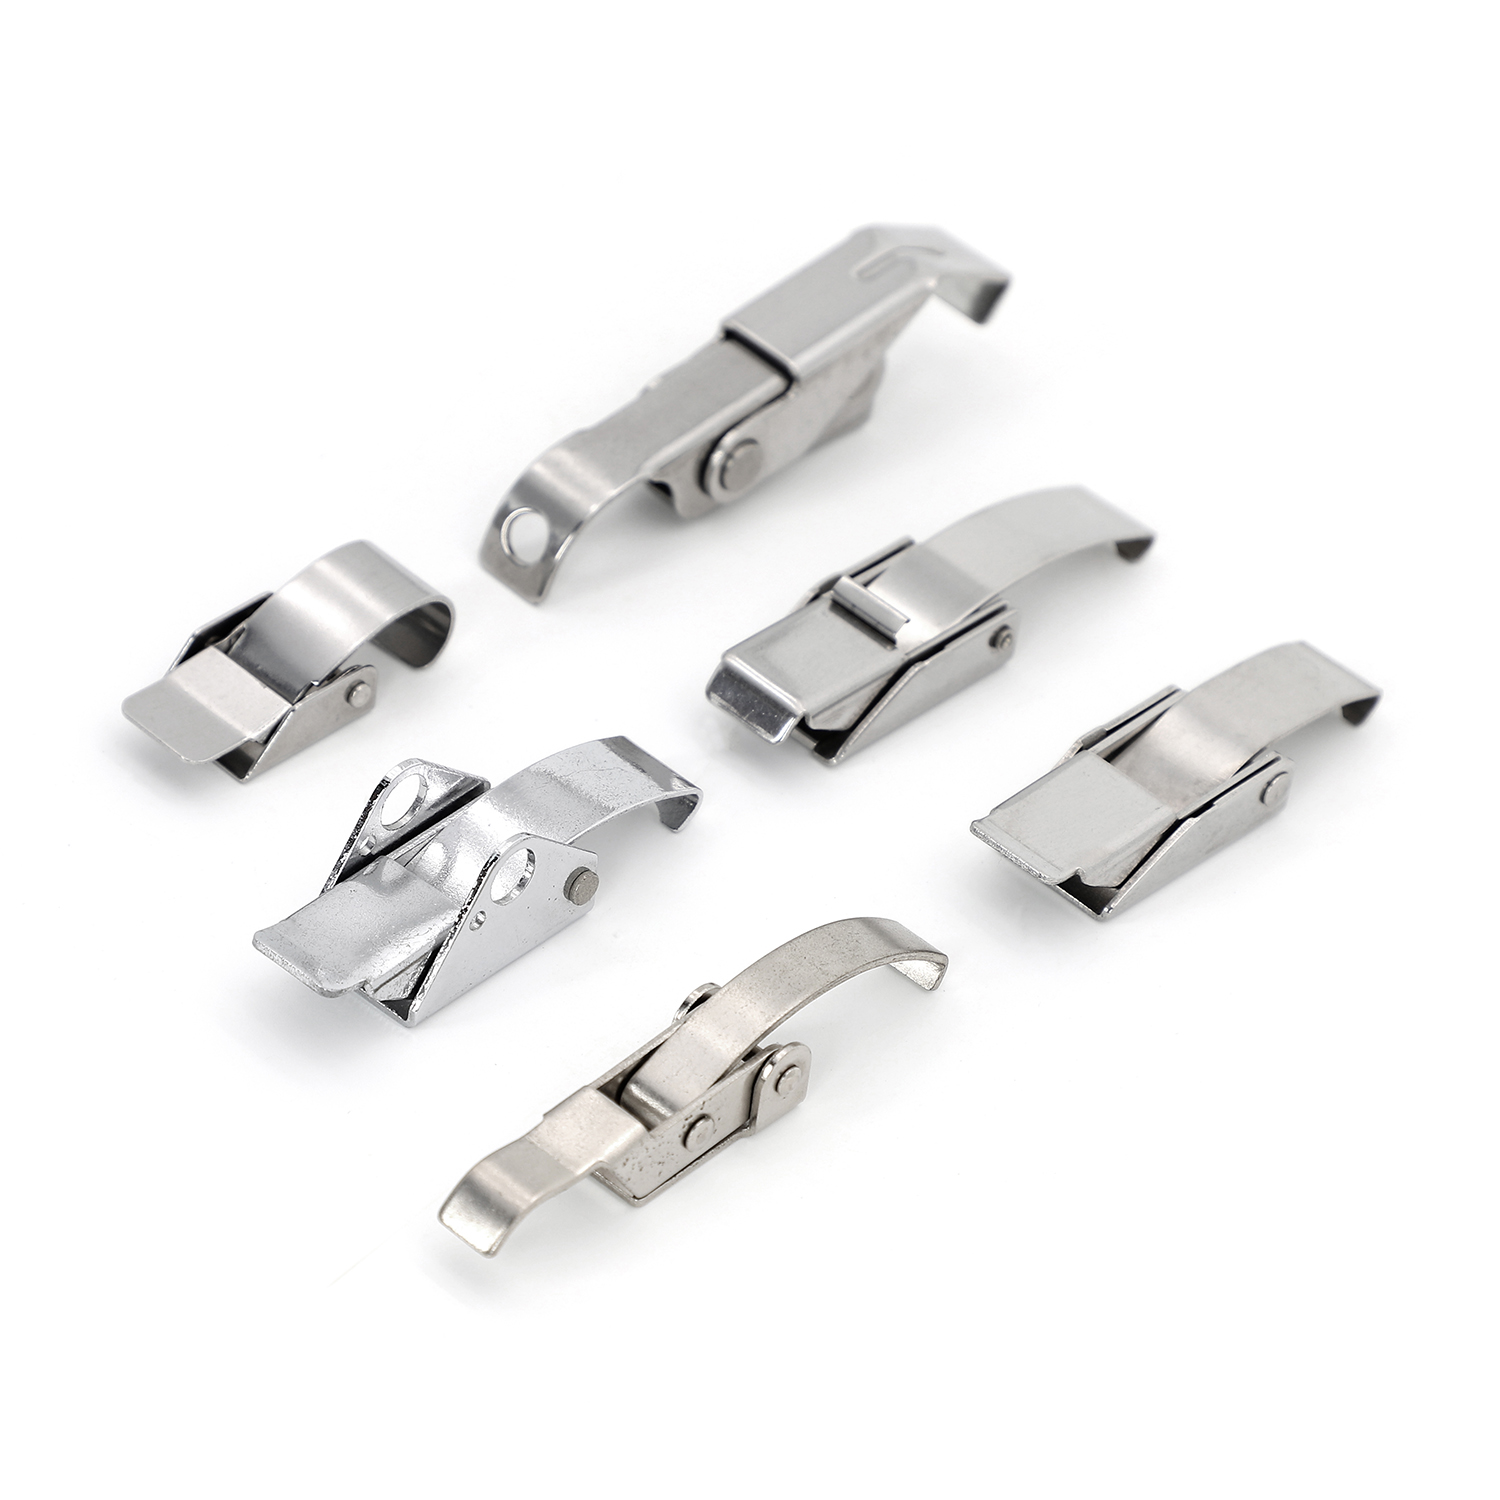 China toggle latch manufacturer Stainless Steel Sus201 sus 304 sus